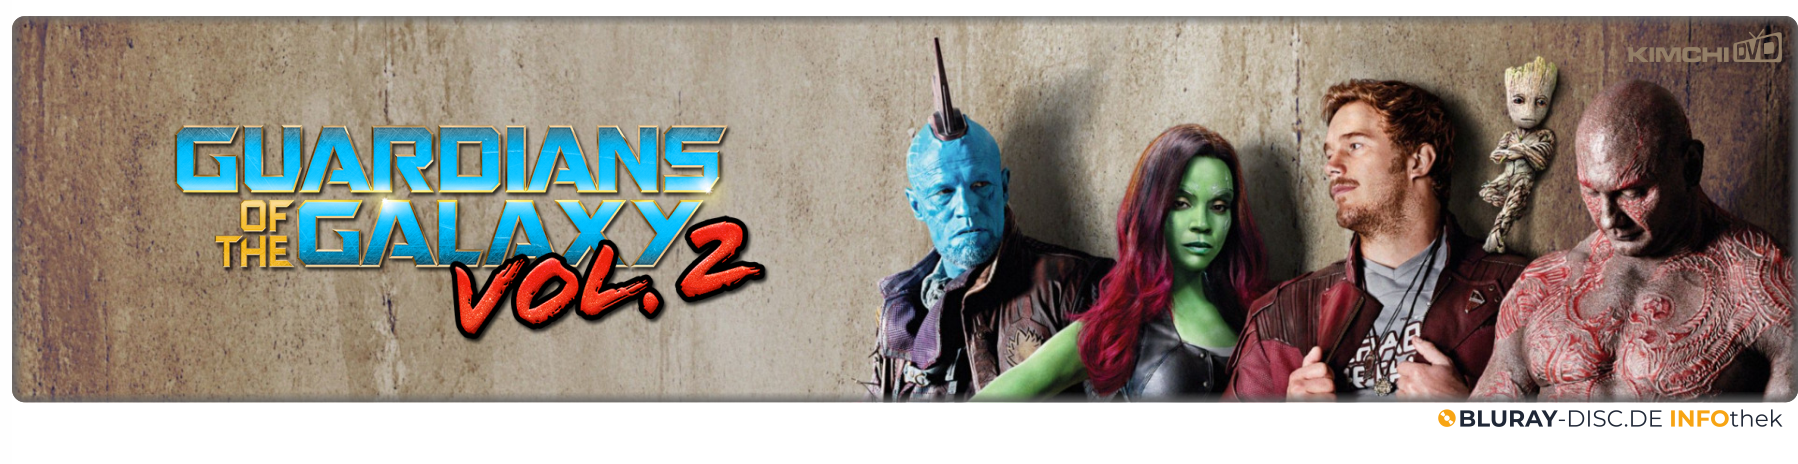 Guardians_of_the_Galaxy_Vol._2.png